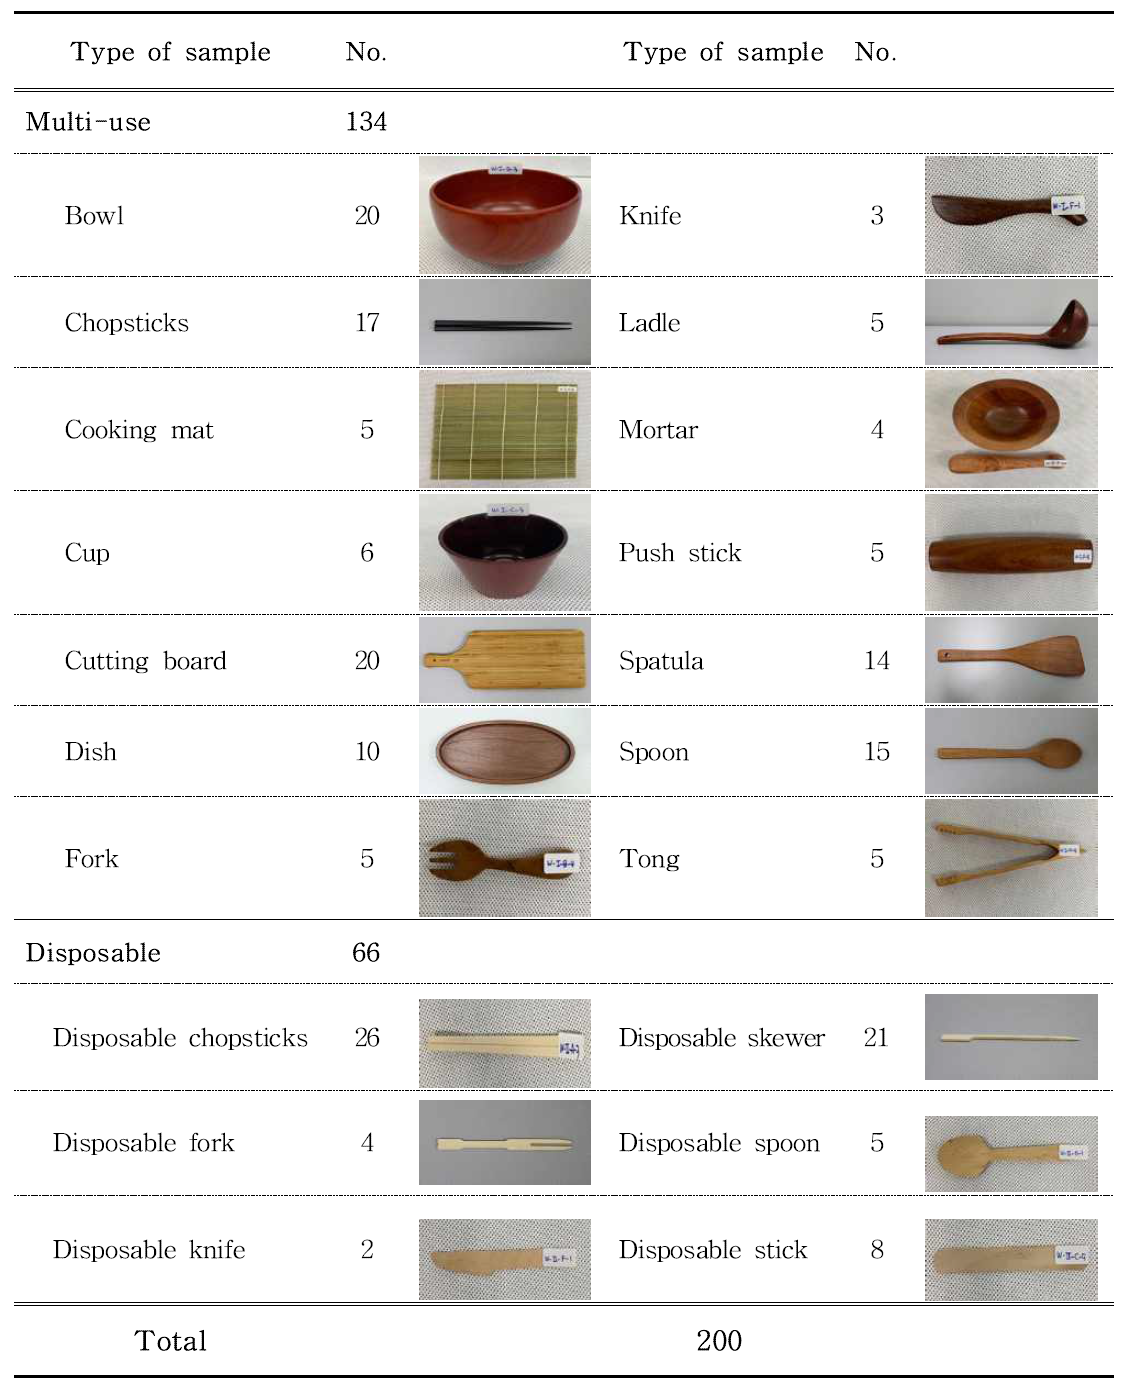 The number of wooden food contact materials